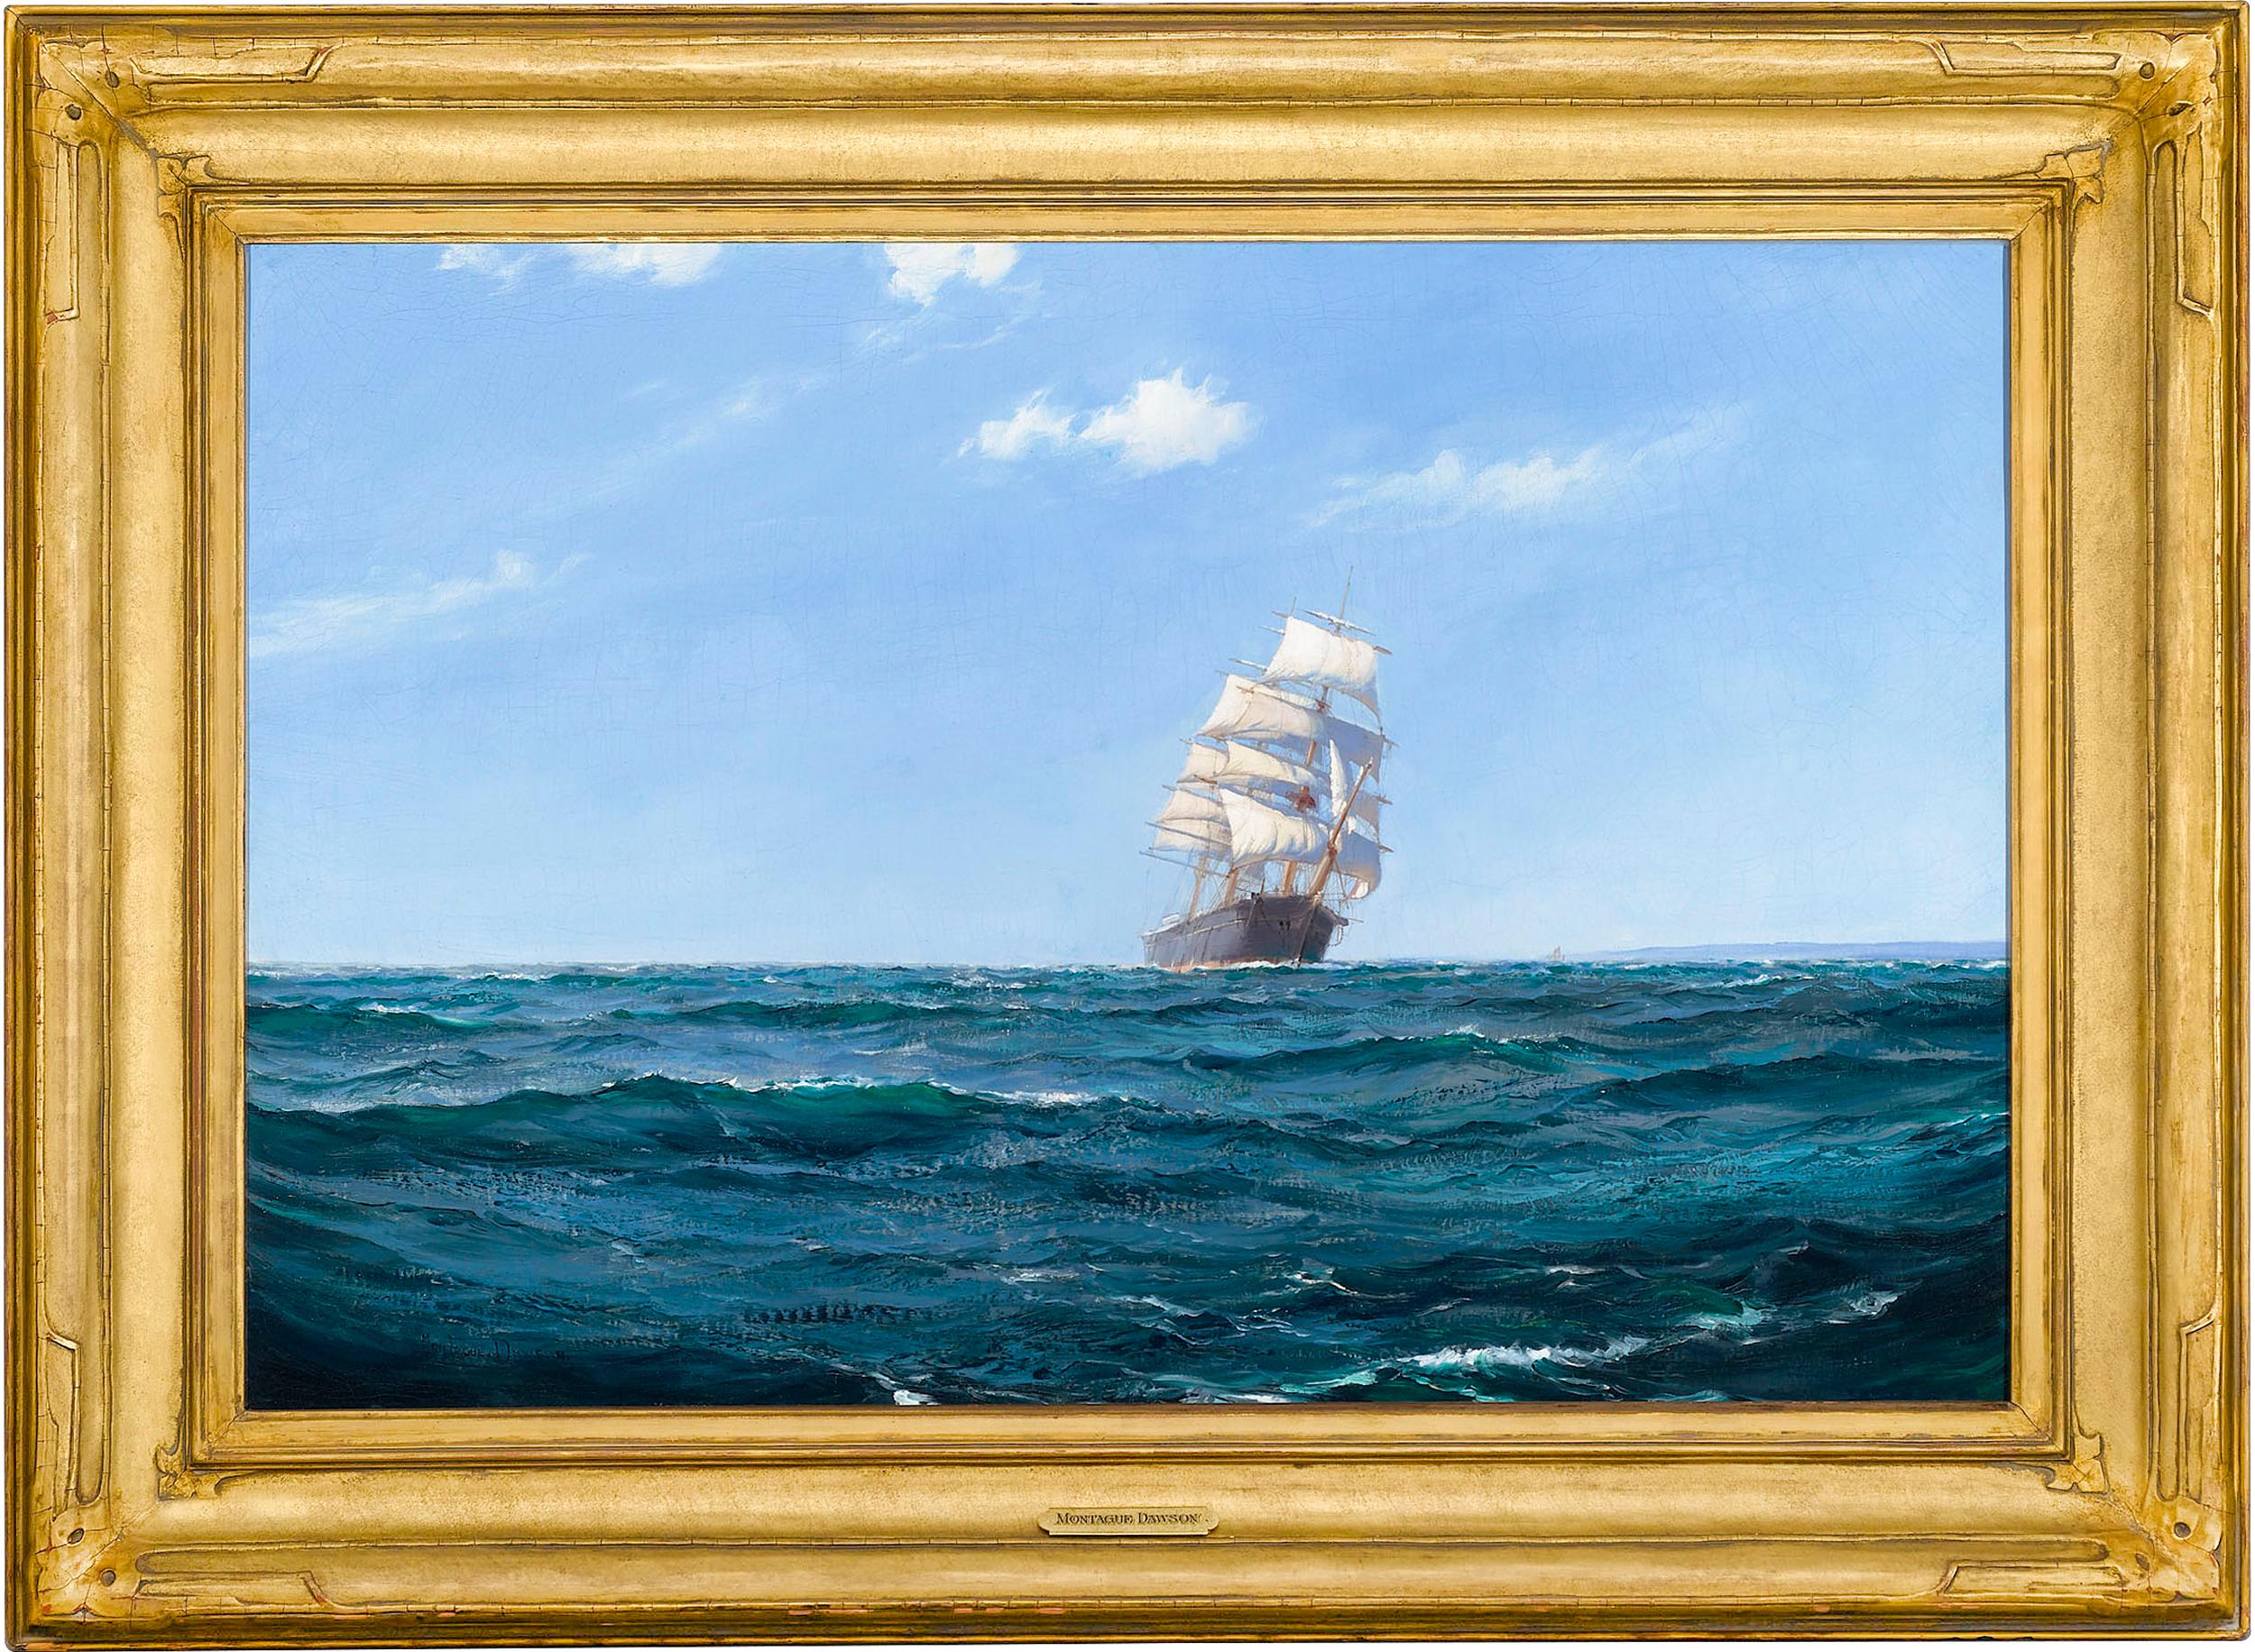 A Ship in Open Water - Painting by Montague Dawson